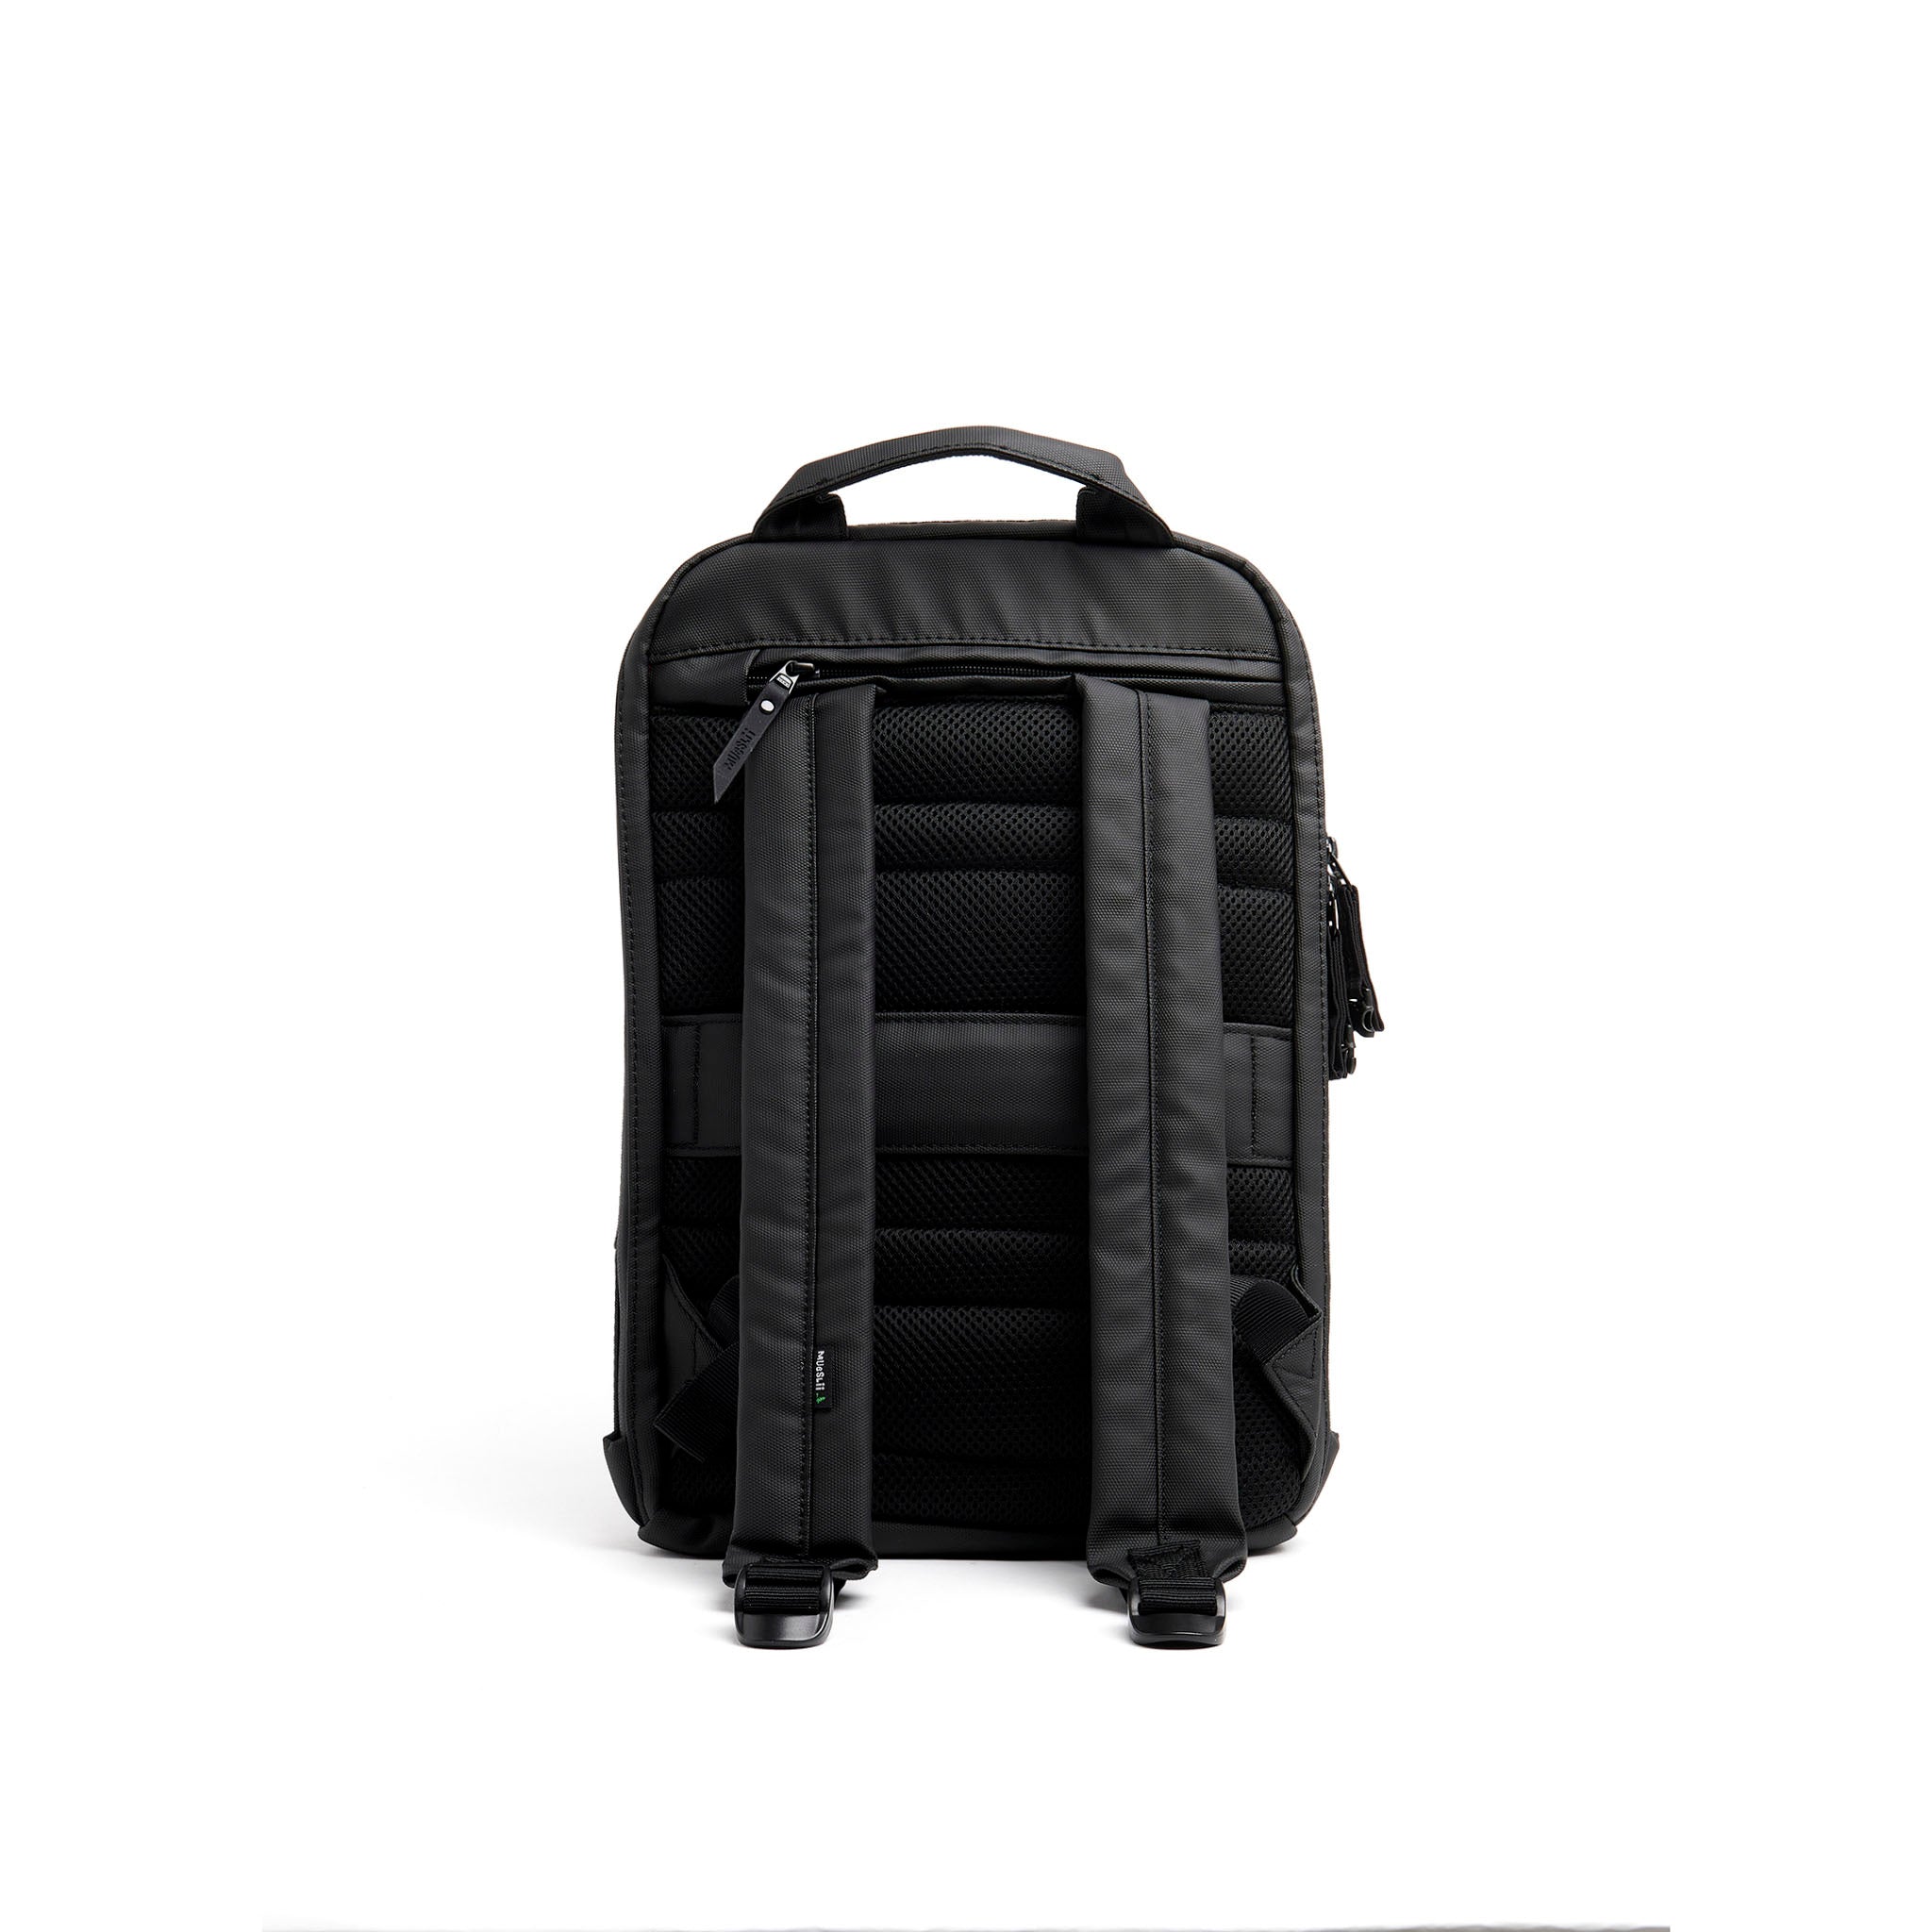 Mueslii small backpack, made of PU coated waterproof nylon, with a laptop compartment, color black, back view.